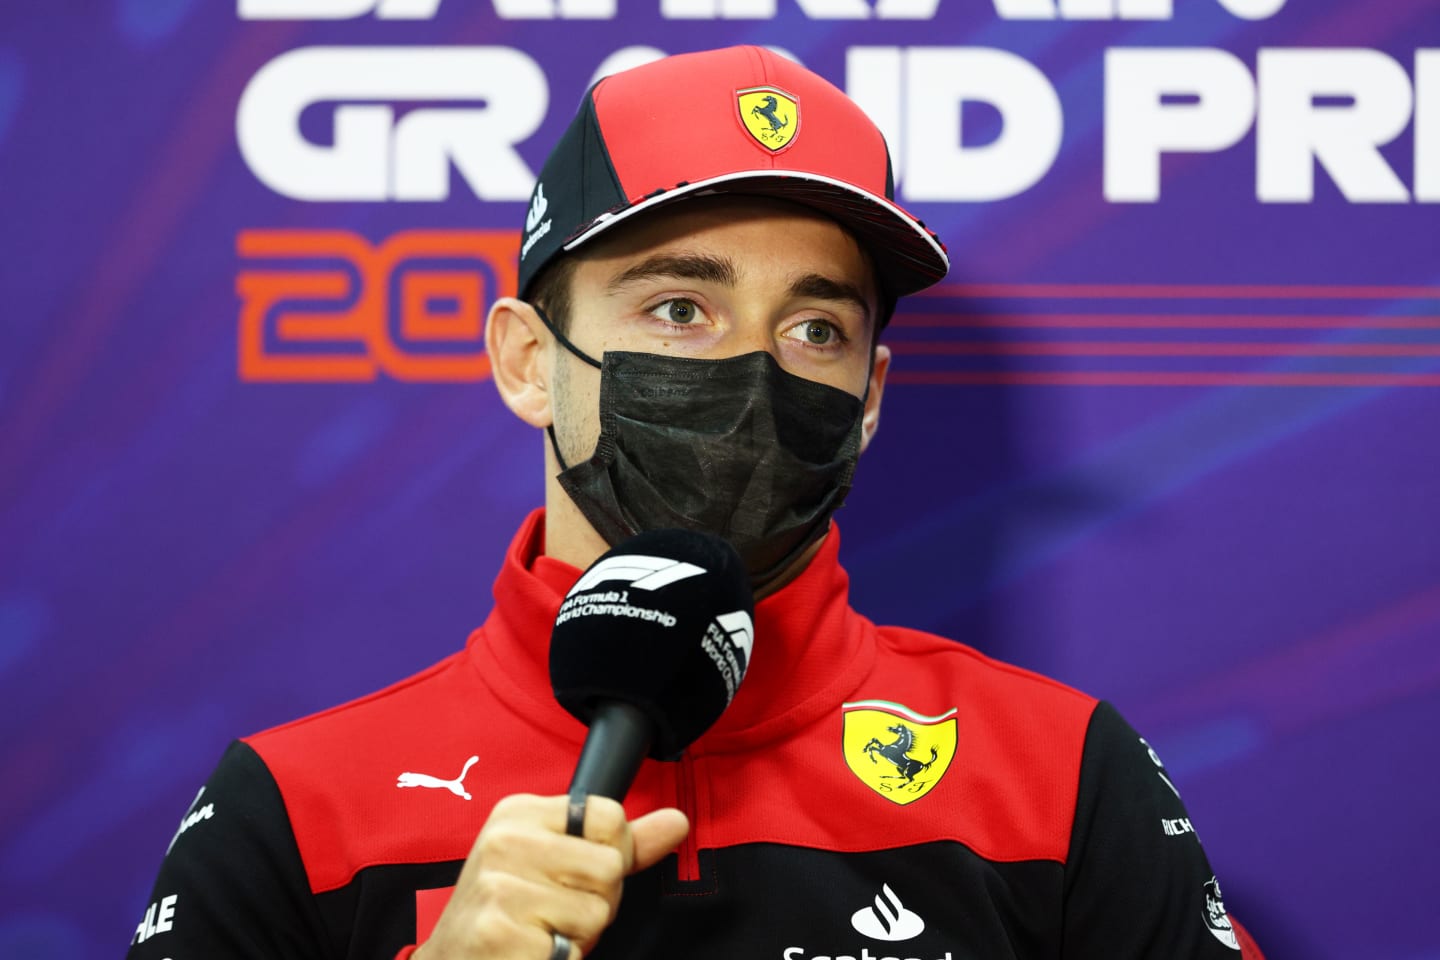 BAHRAIN, BAHRAIN - MARCH 18: Charles Leclerc of Monaco and Ferrari talks in the Drivers Press Conference before practice ahead of the F1 Grand Prix of Bahrain at Bahrain International Circuit on March 18, 2022 in Bahrain, Bahrain. (Photo by Clive Rose/Getty Images)